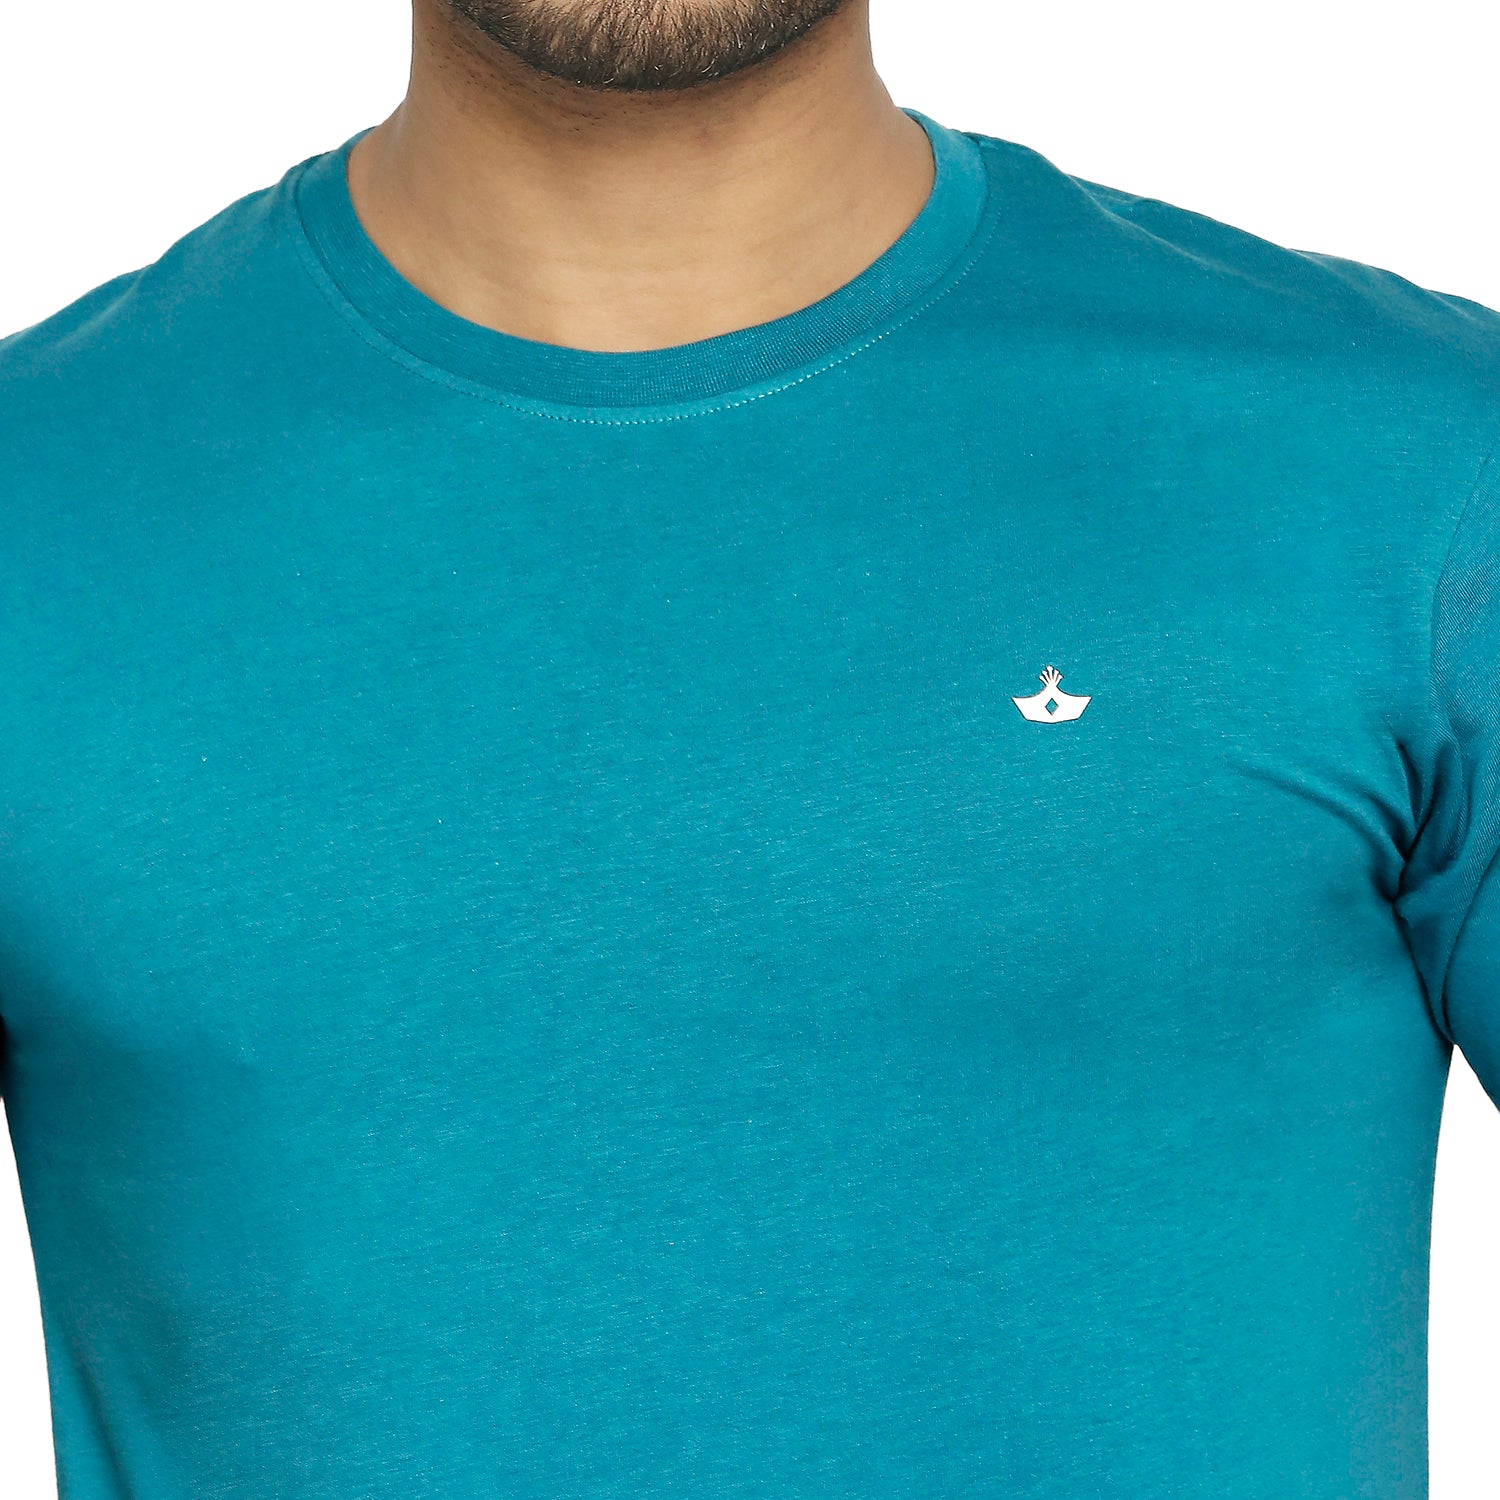 Solid Teal Everyday Essential Cotton T-Shirt for Men